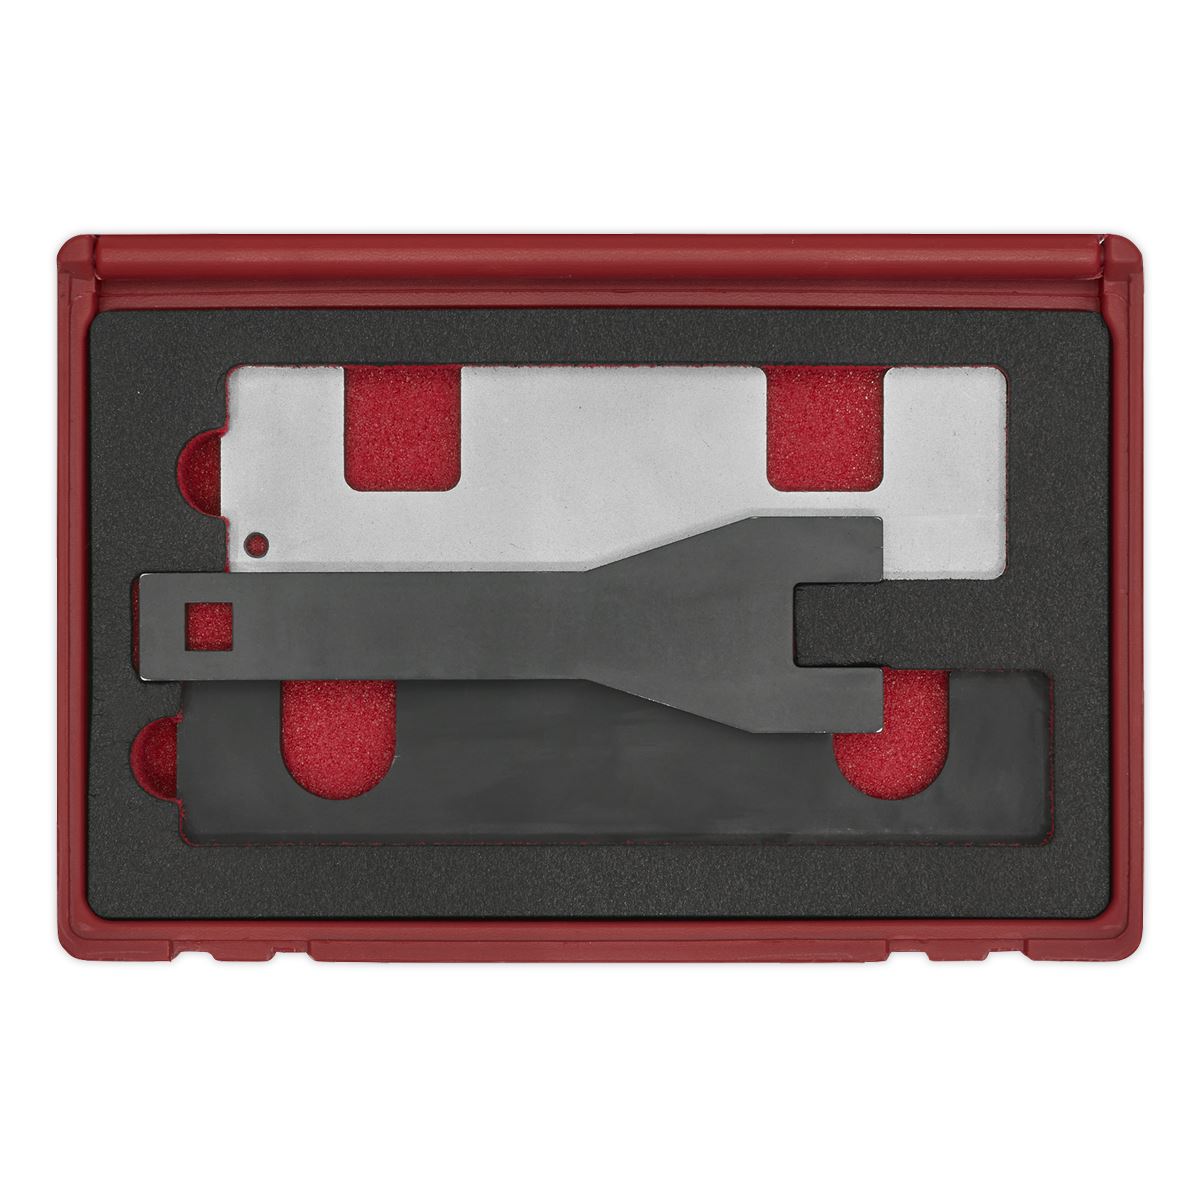 Sealey Petrol Engine Timing Tool Kit - for GM 1.0/1.4 Chain Drive